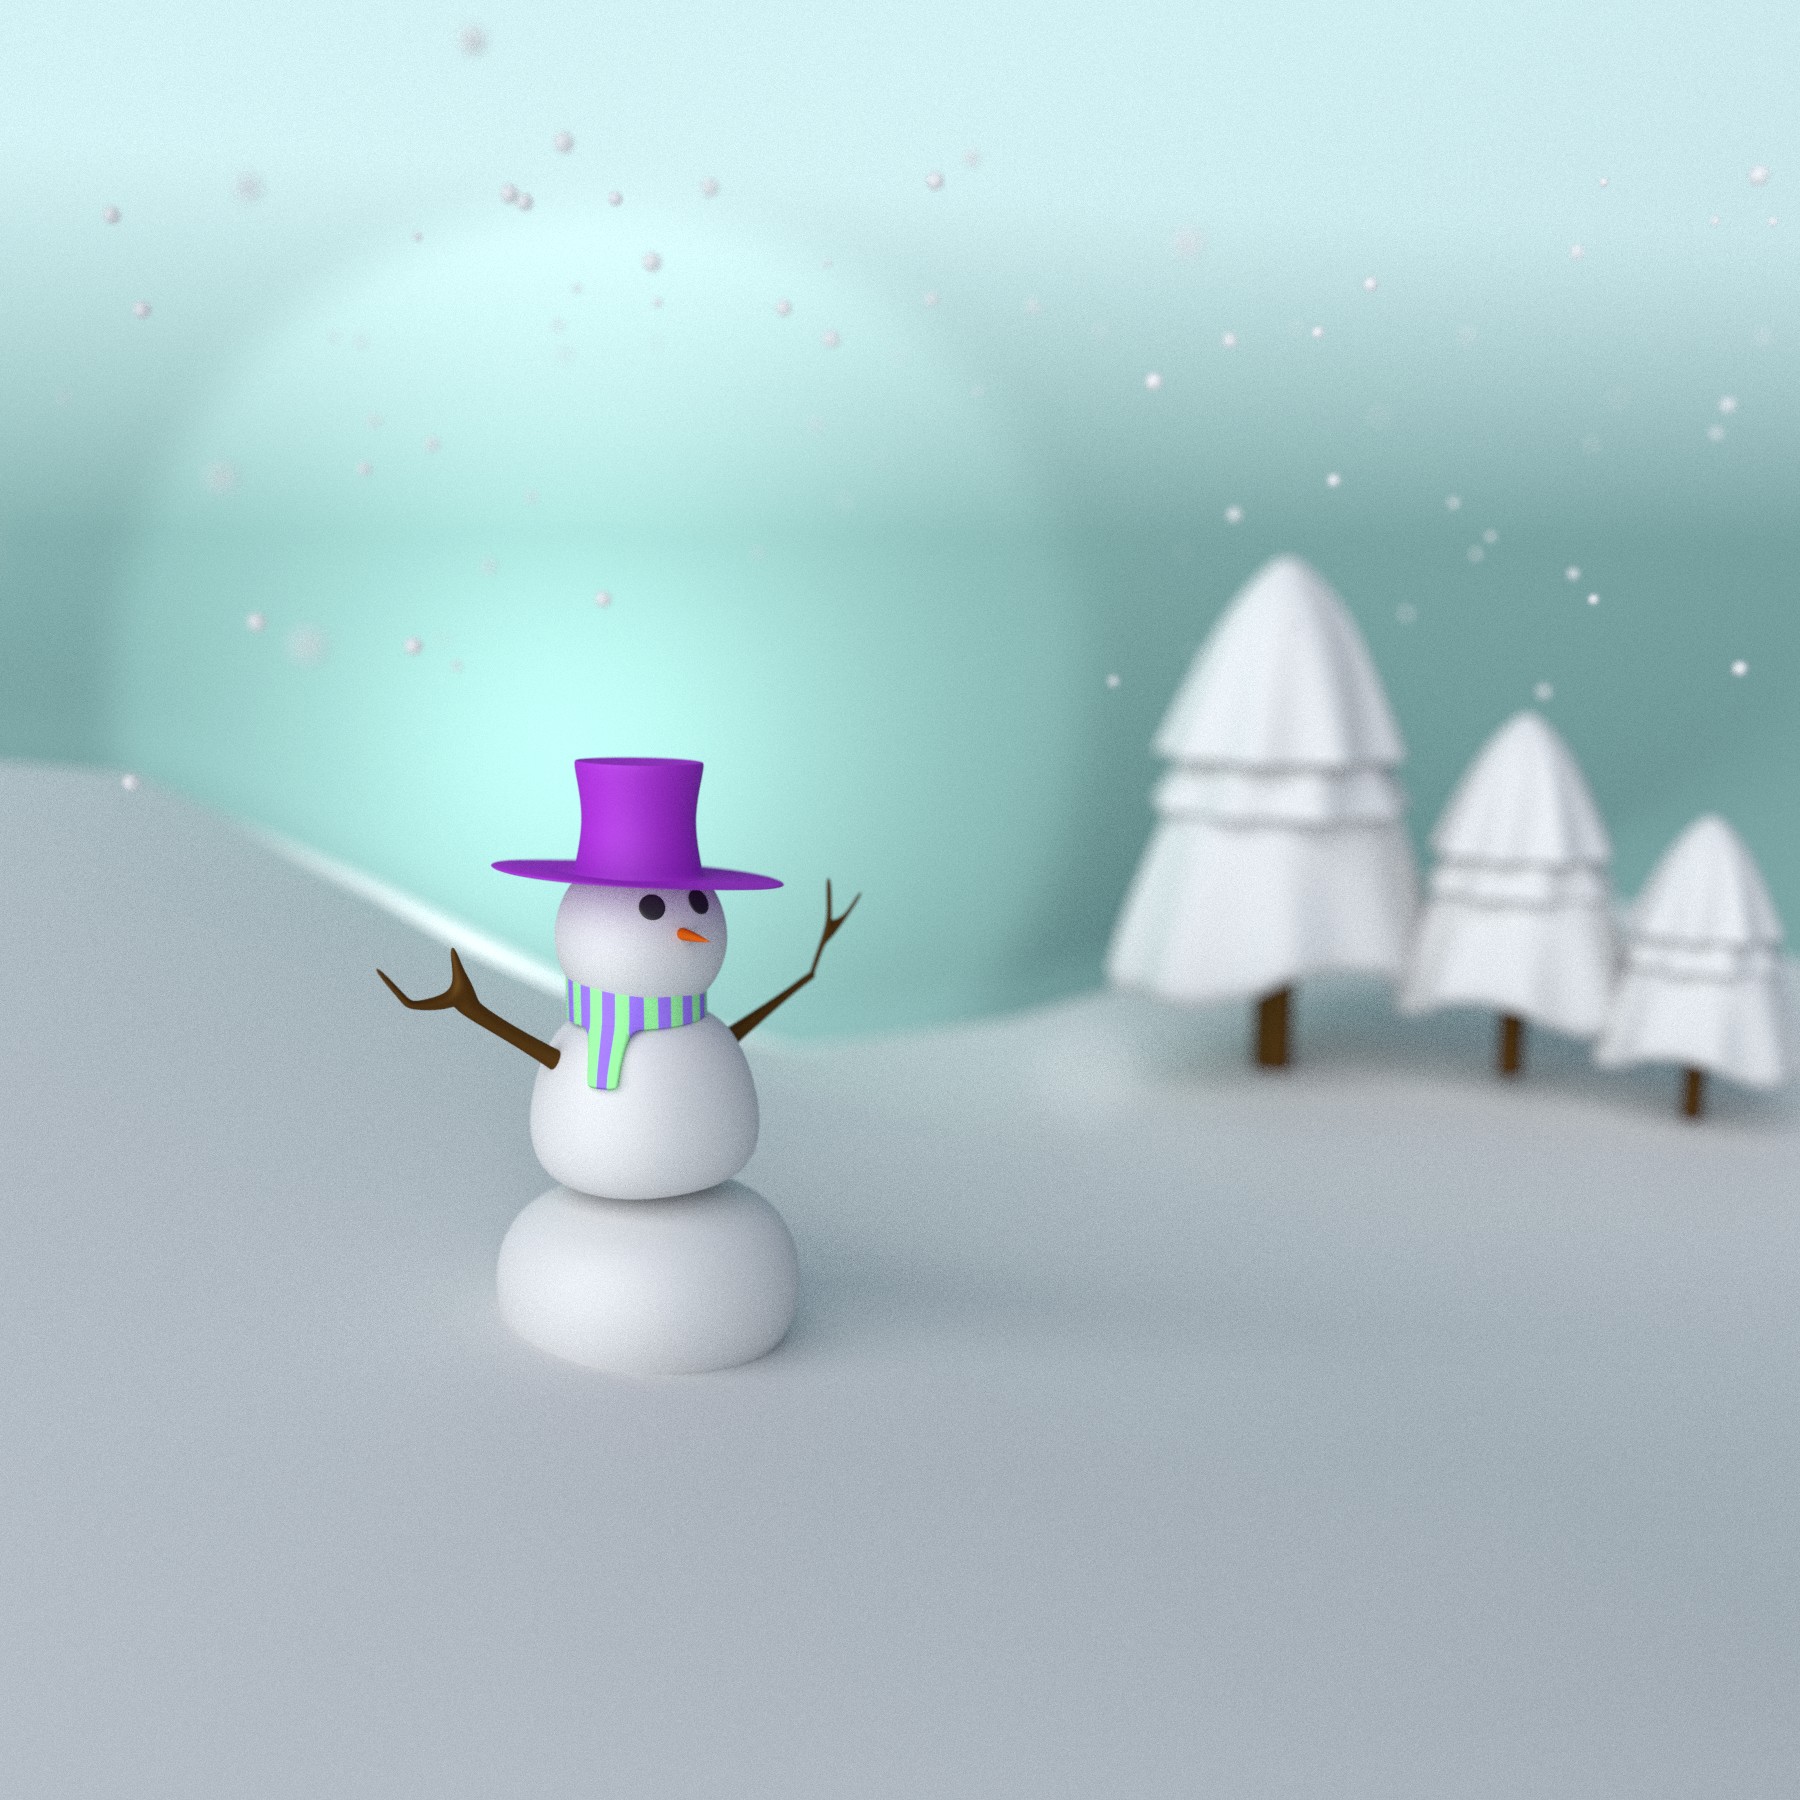 Snow Man preview image 1